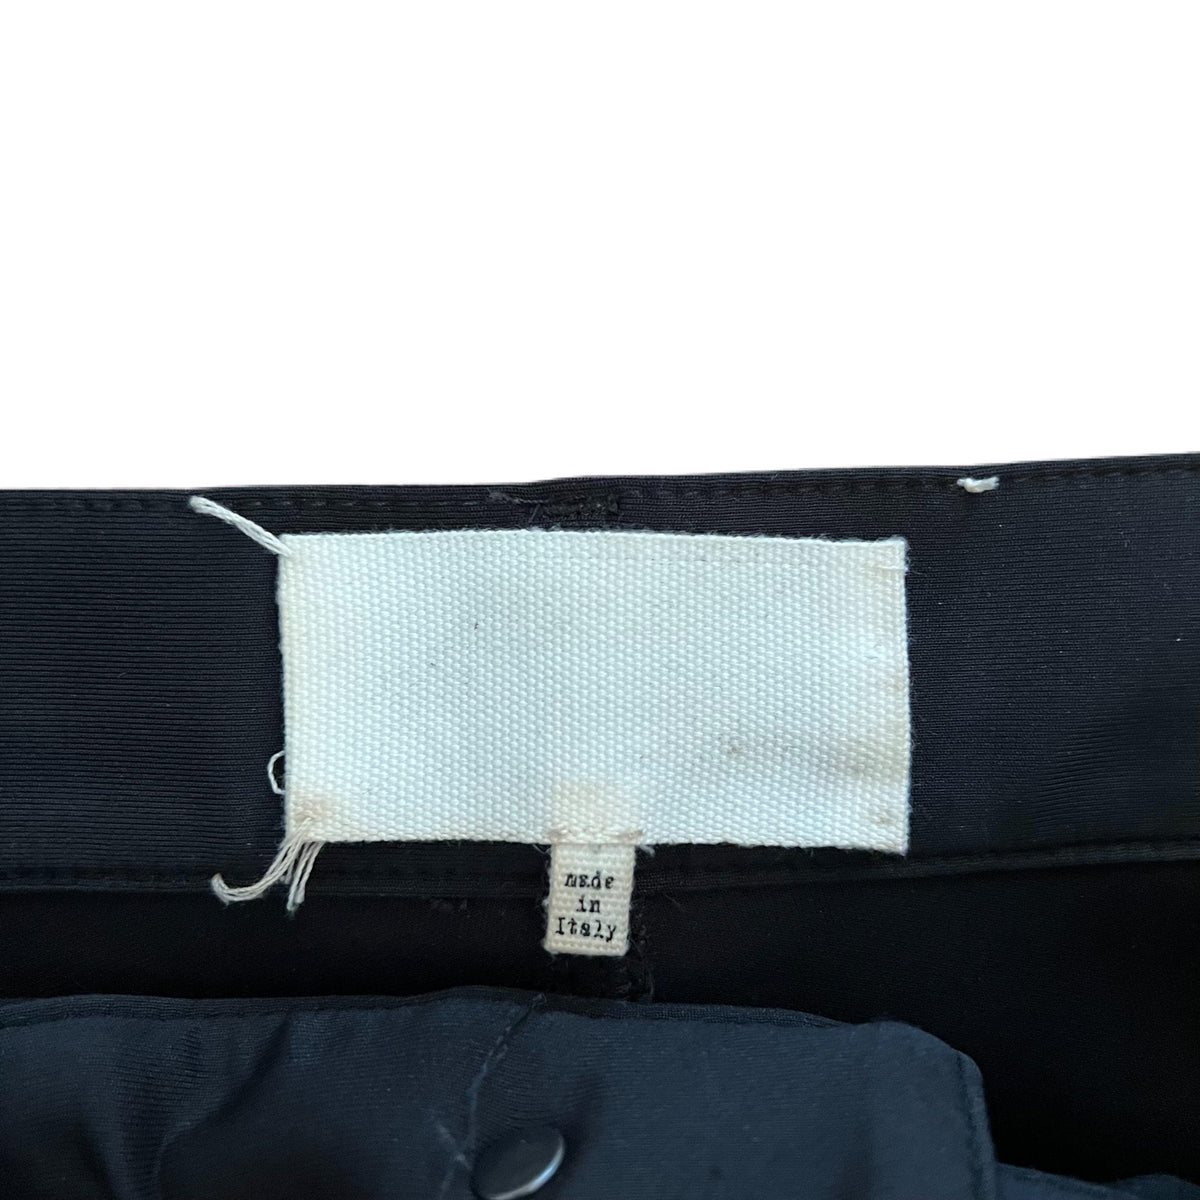 MAISON MARGIELA Black High Waisted Skinny Pants with Ankle Zipper | Size 38 - theREMODA